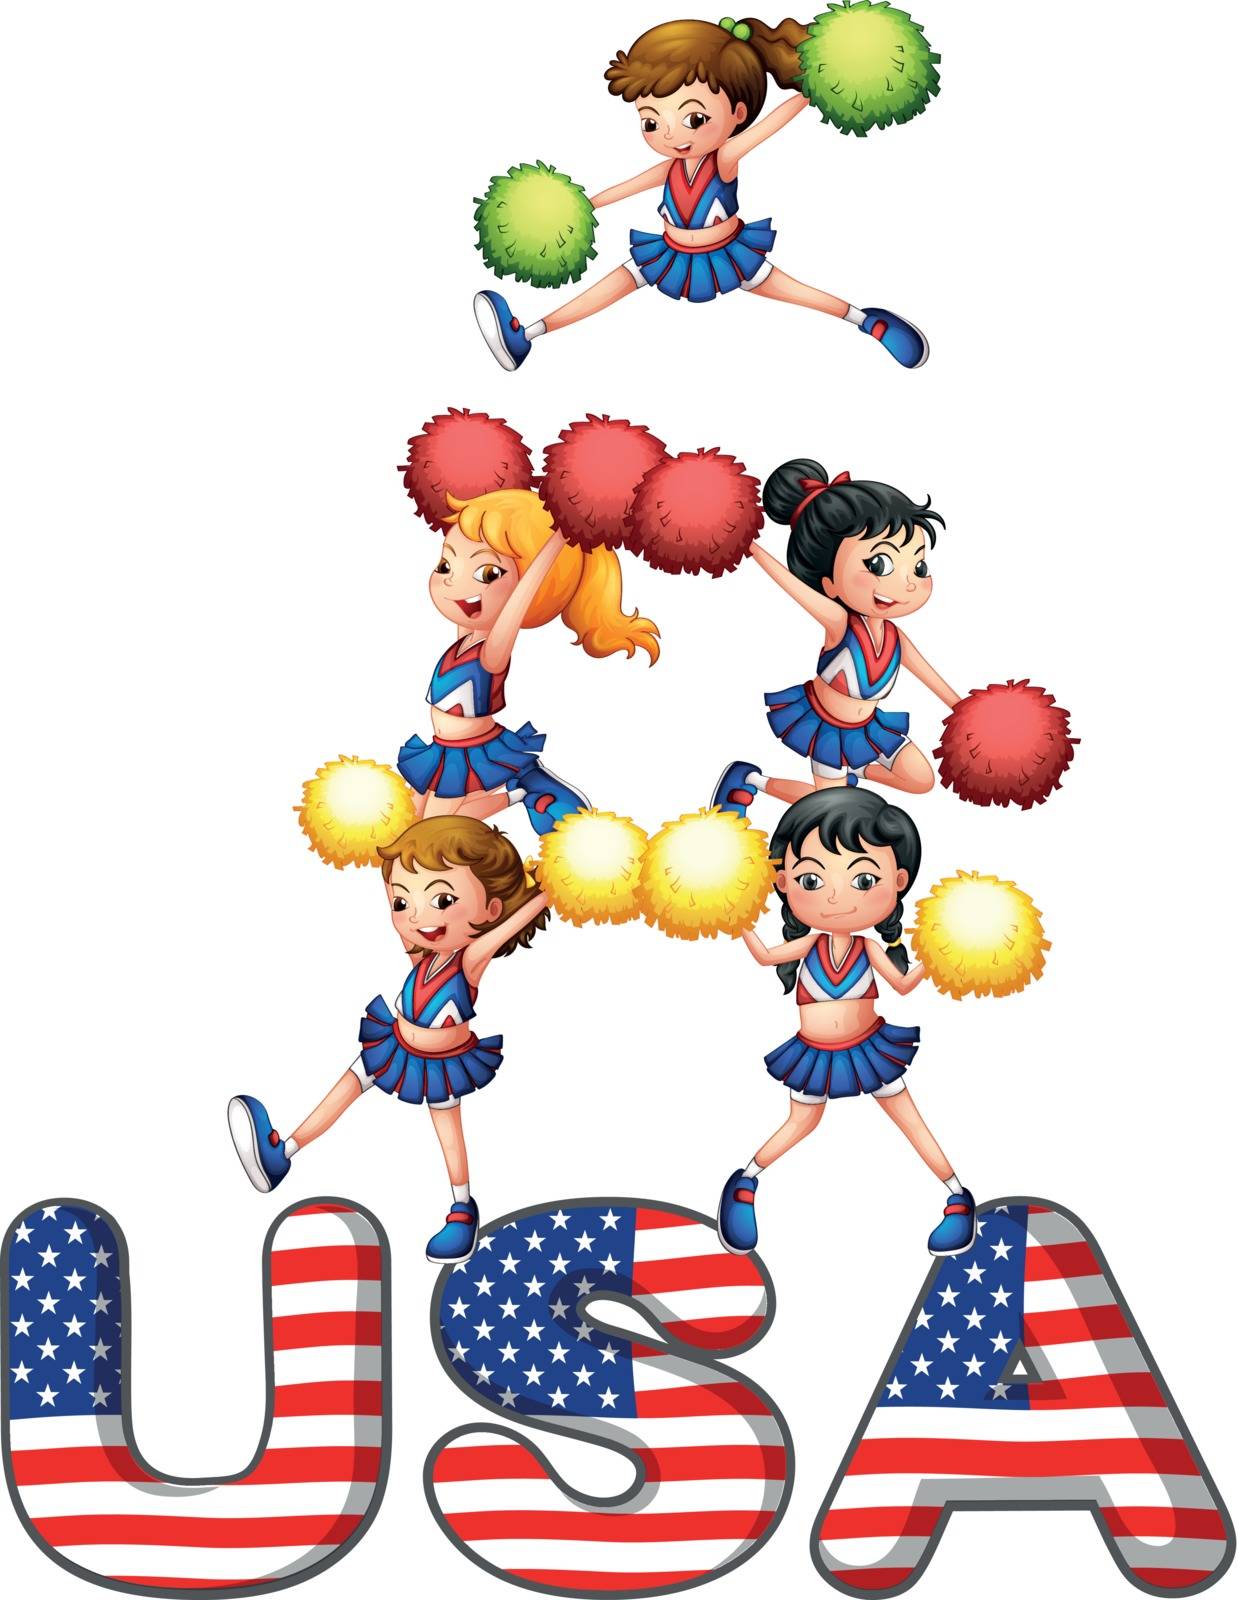 The USA cheering squad by iimages